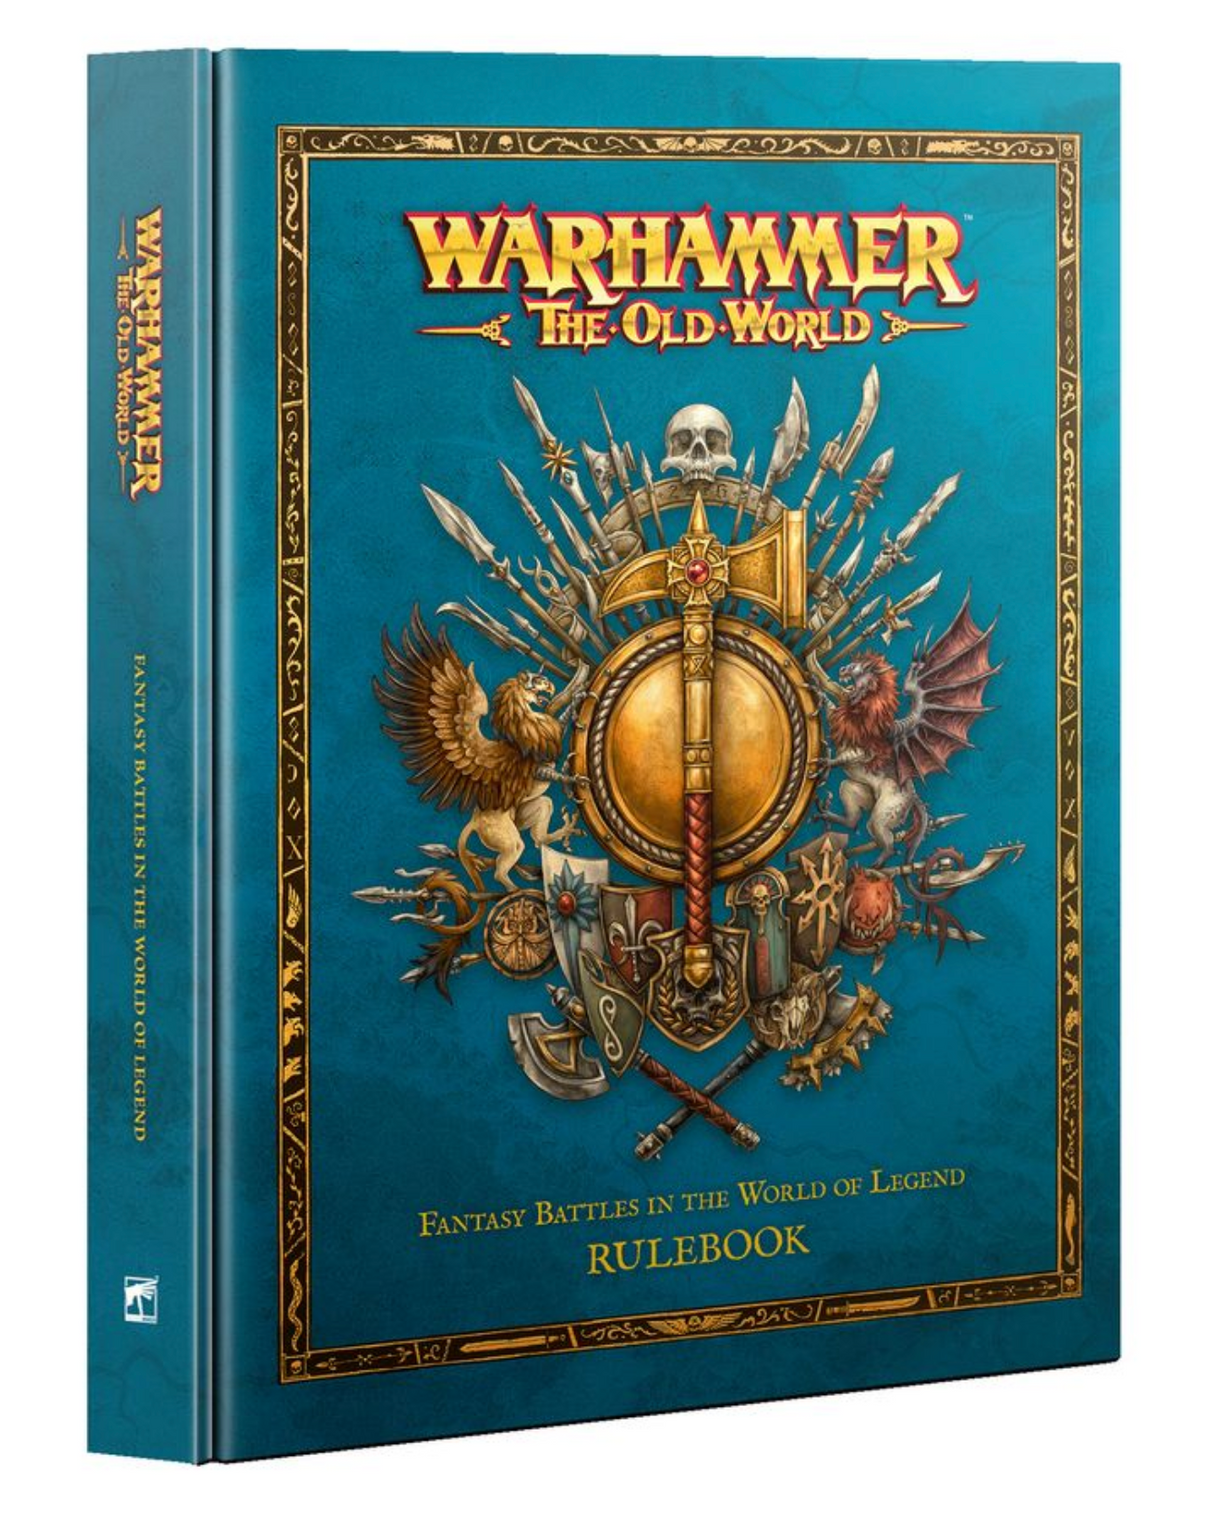 The Old World: Rulebook